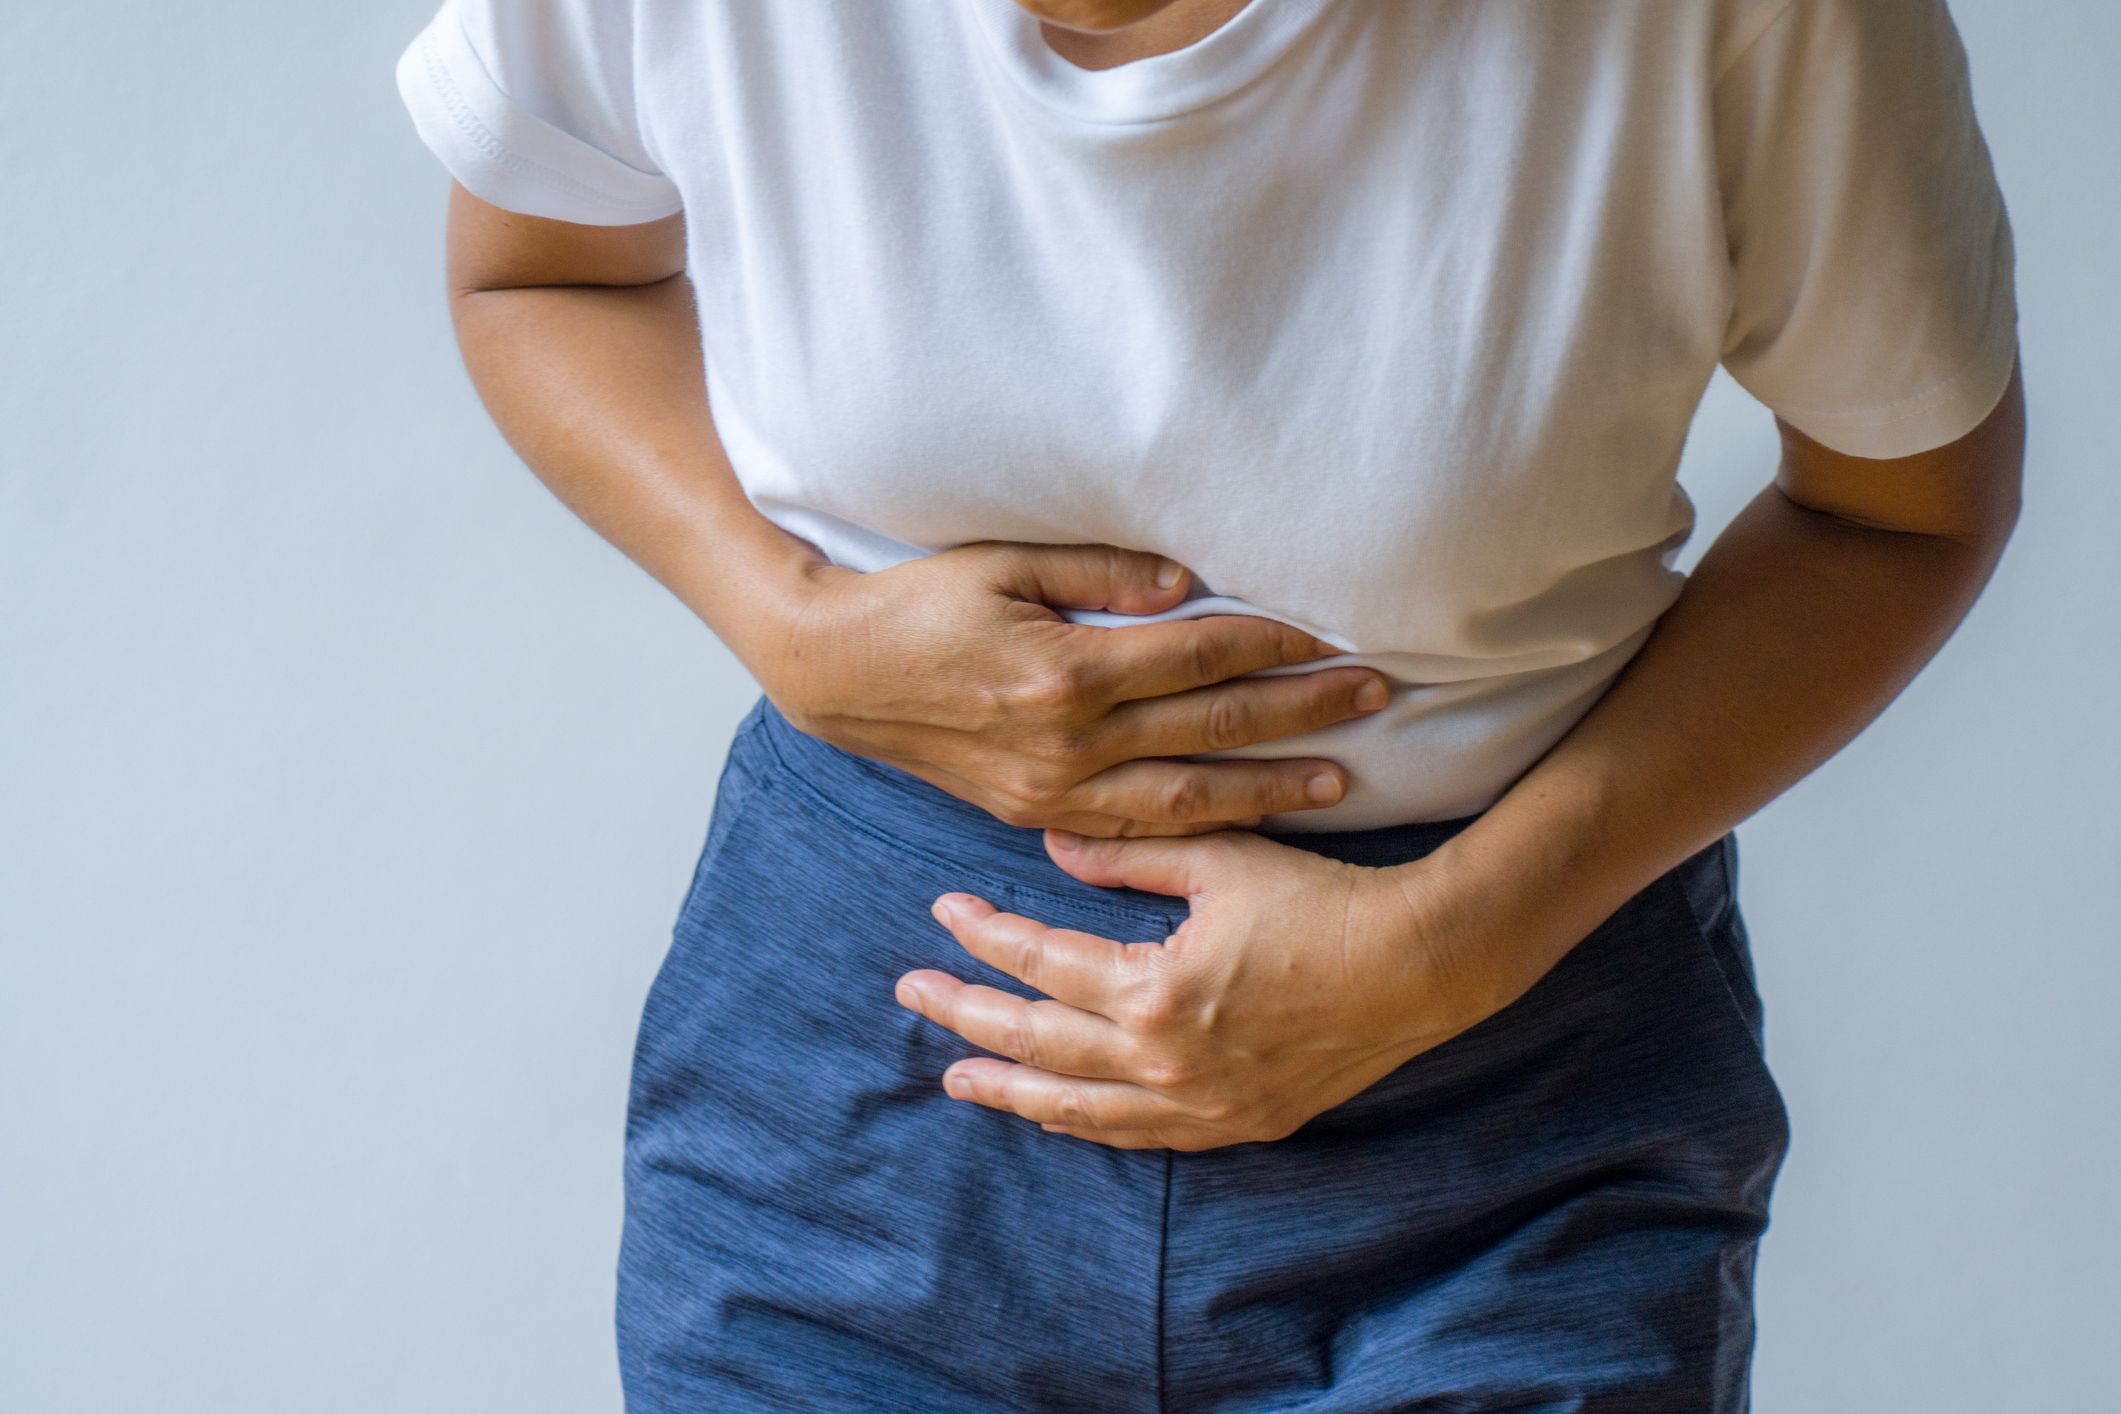 Abdominal Pain: Causes, Diagnosis, Treatment, and Prevention